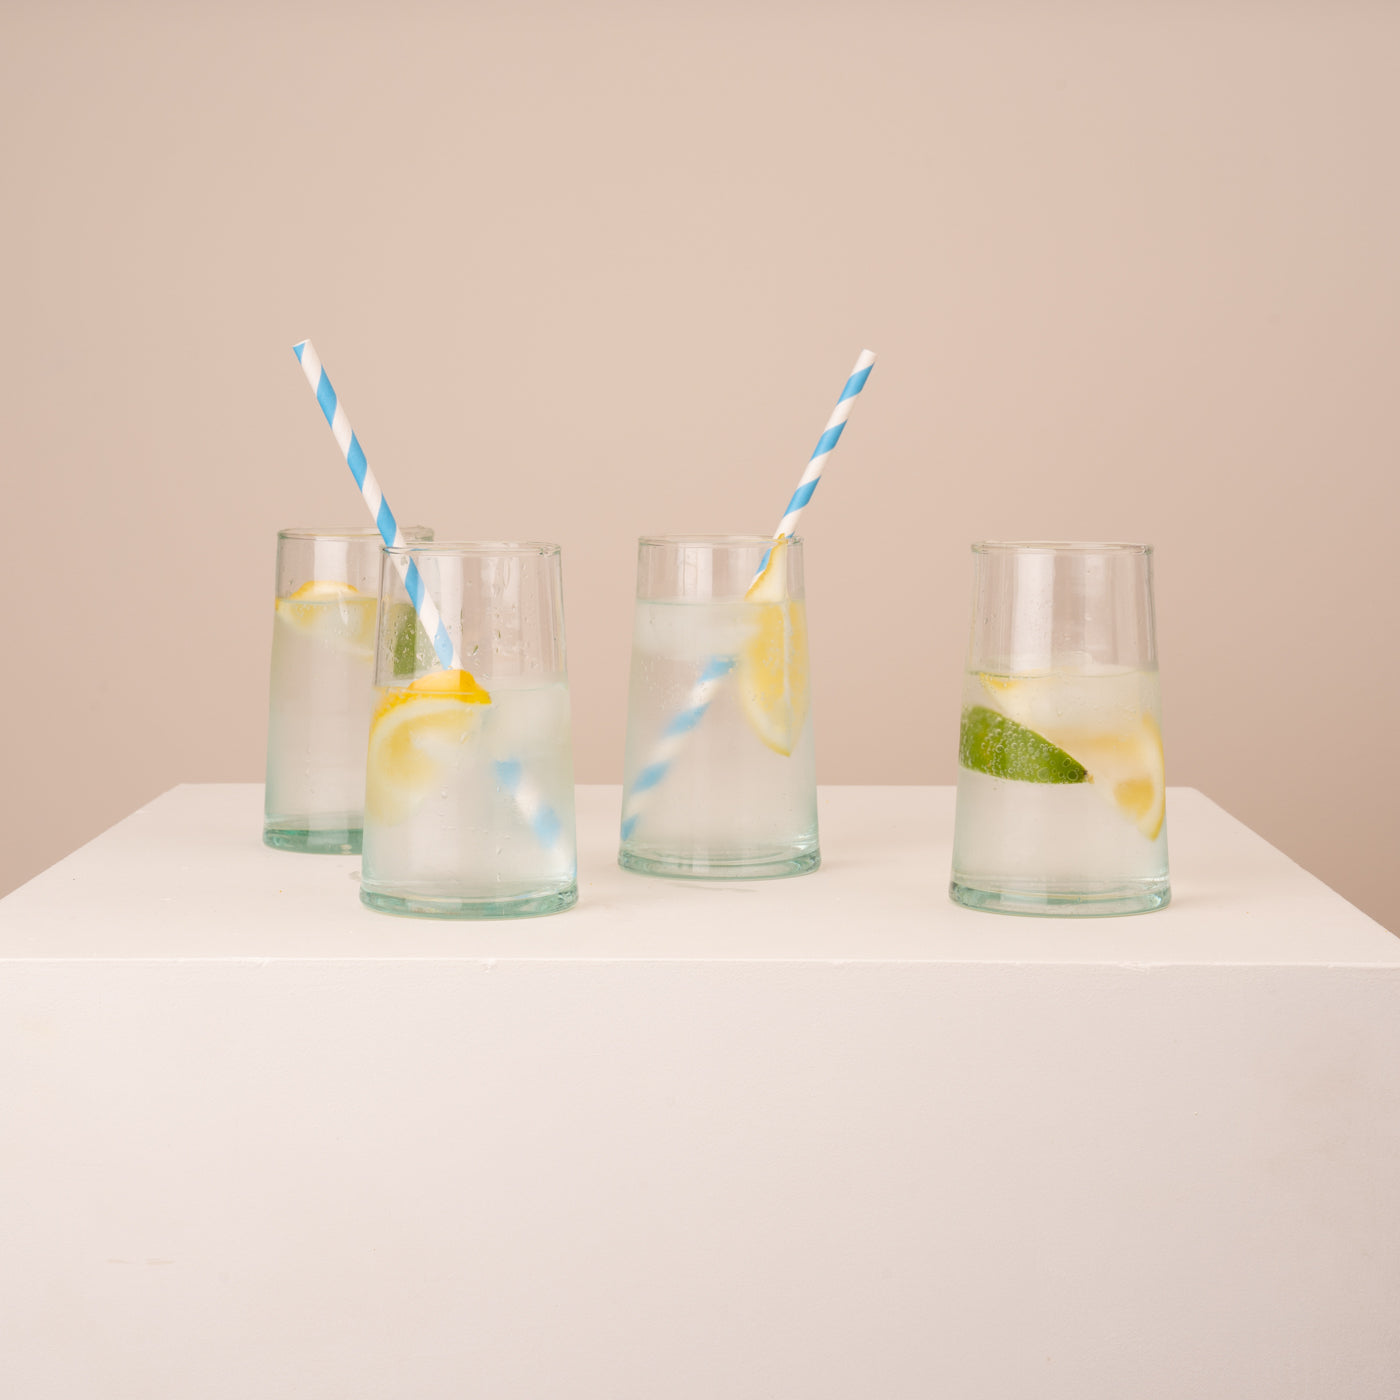 Atlas Works set of 4 Recycled Glass Tumblers perfect for drinks with friends